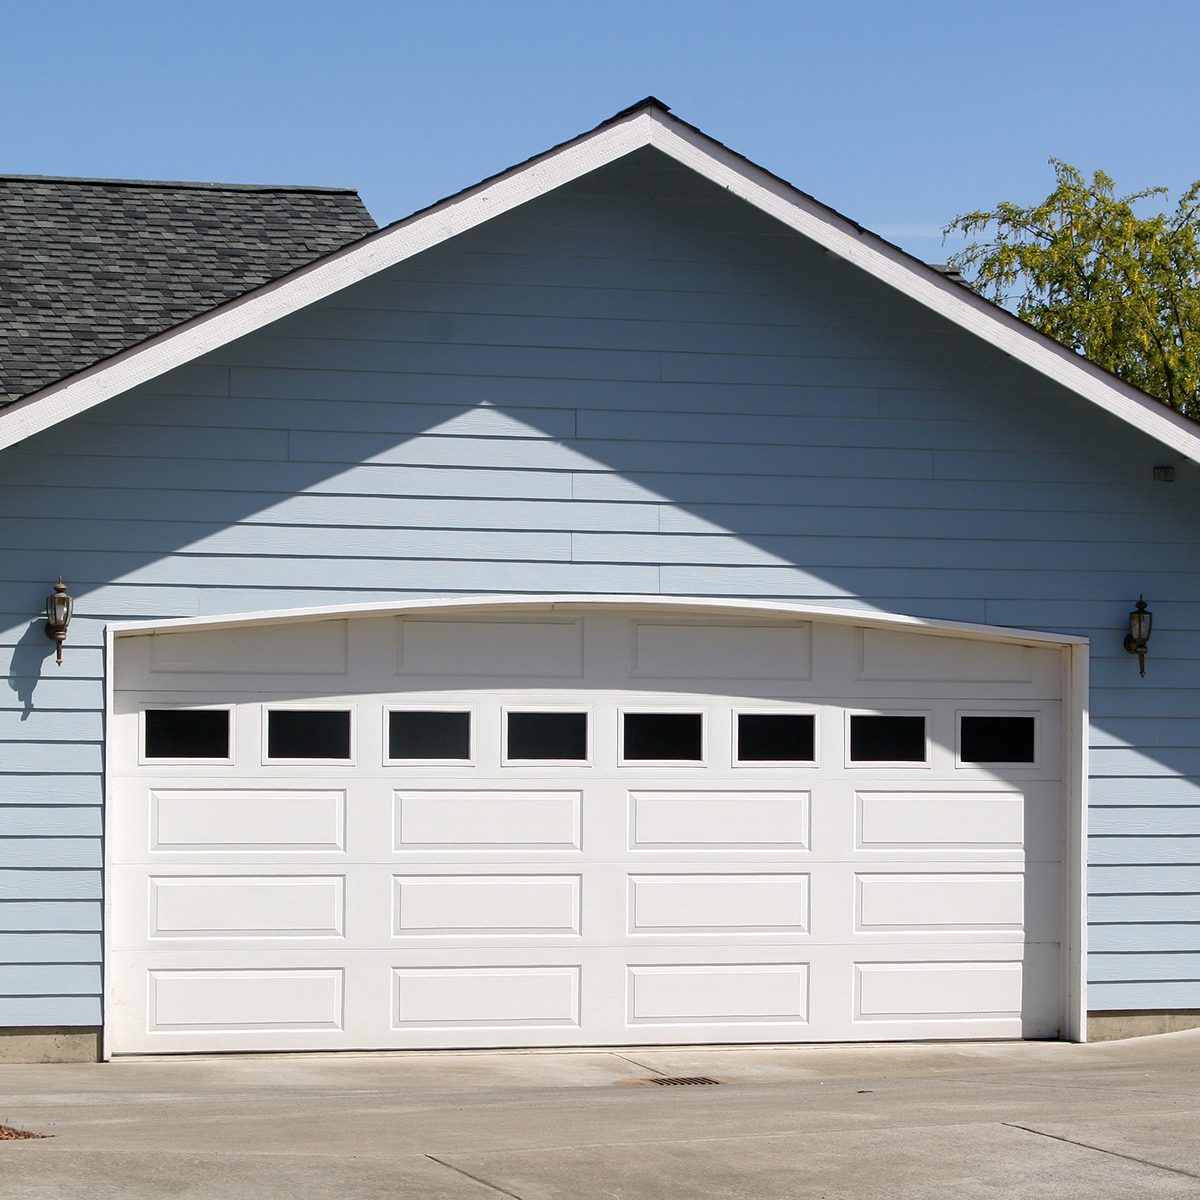 A Few Different Styles of Garage Doors to Choose From